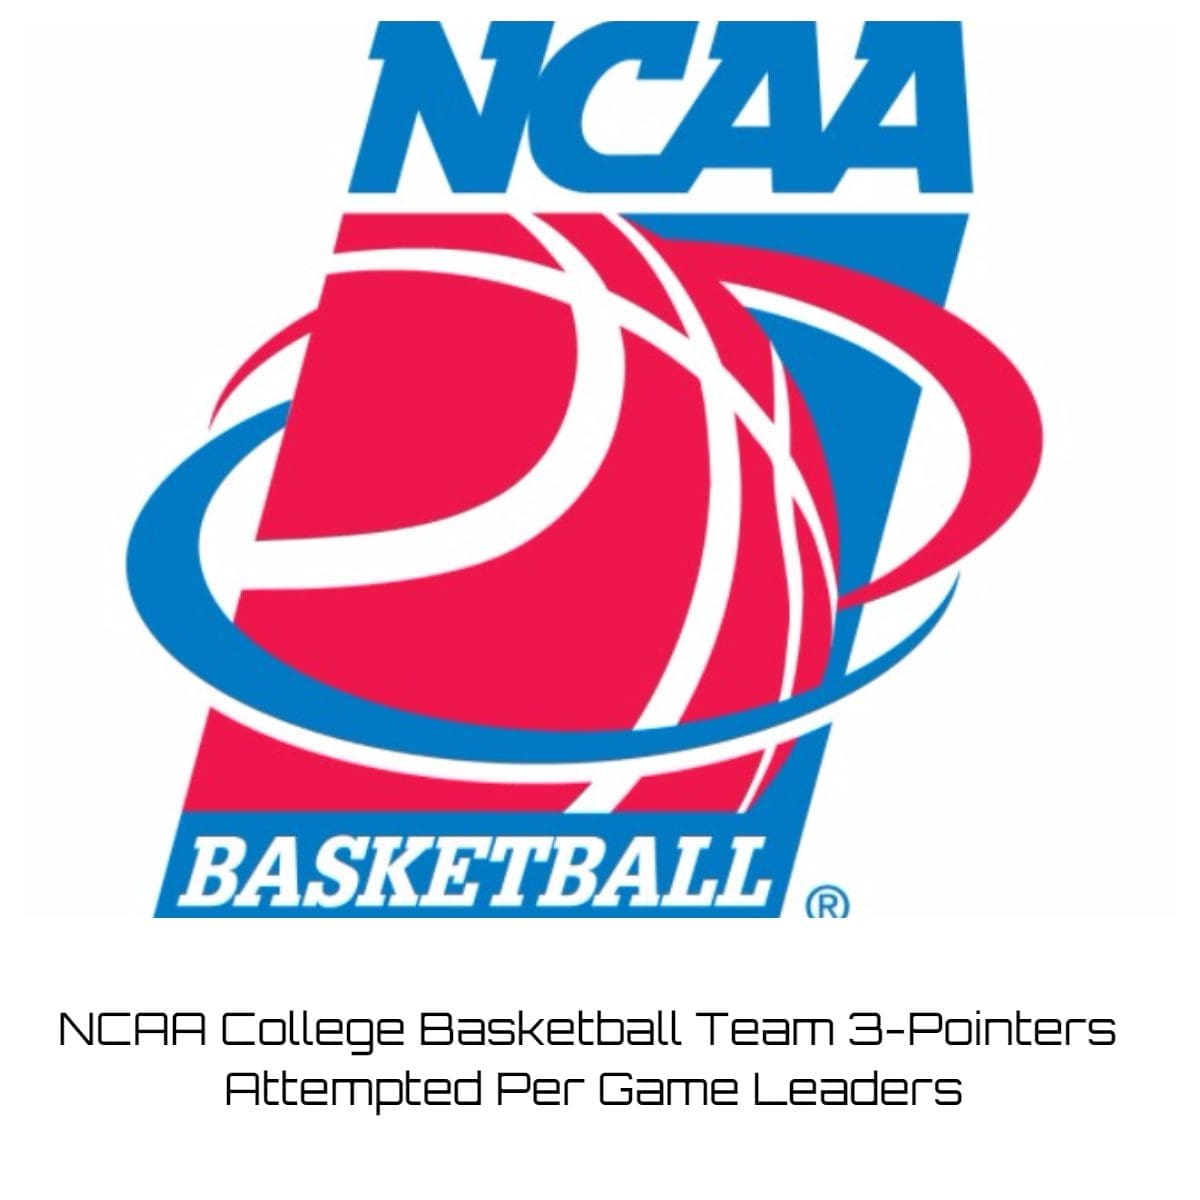 NCAA College Basketball Team 3-Pointers Attempted Per Game Leaders